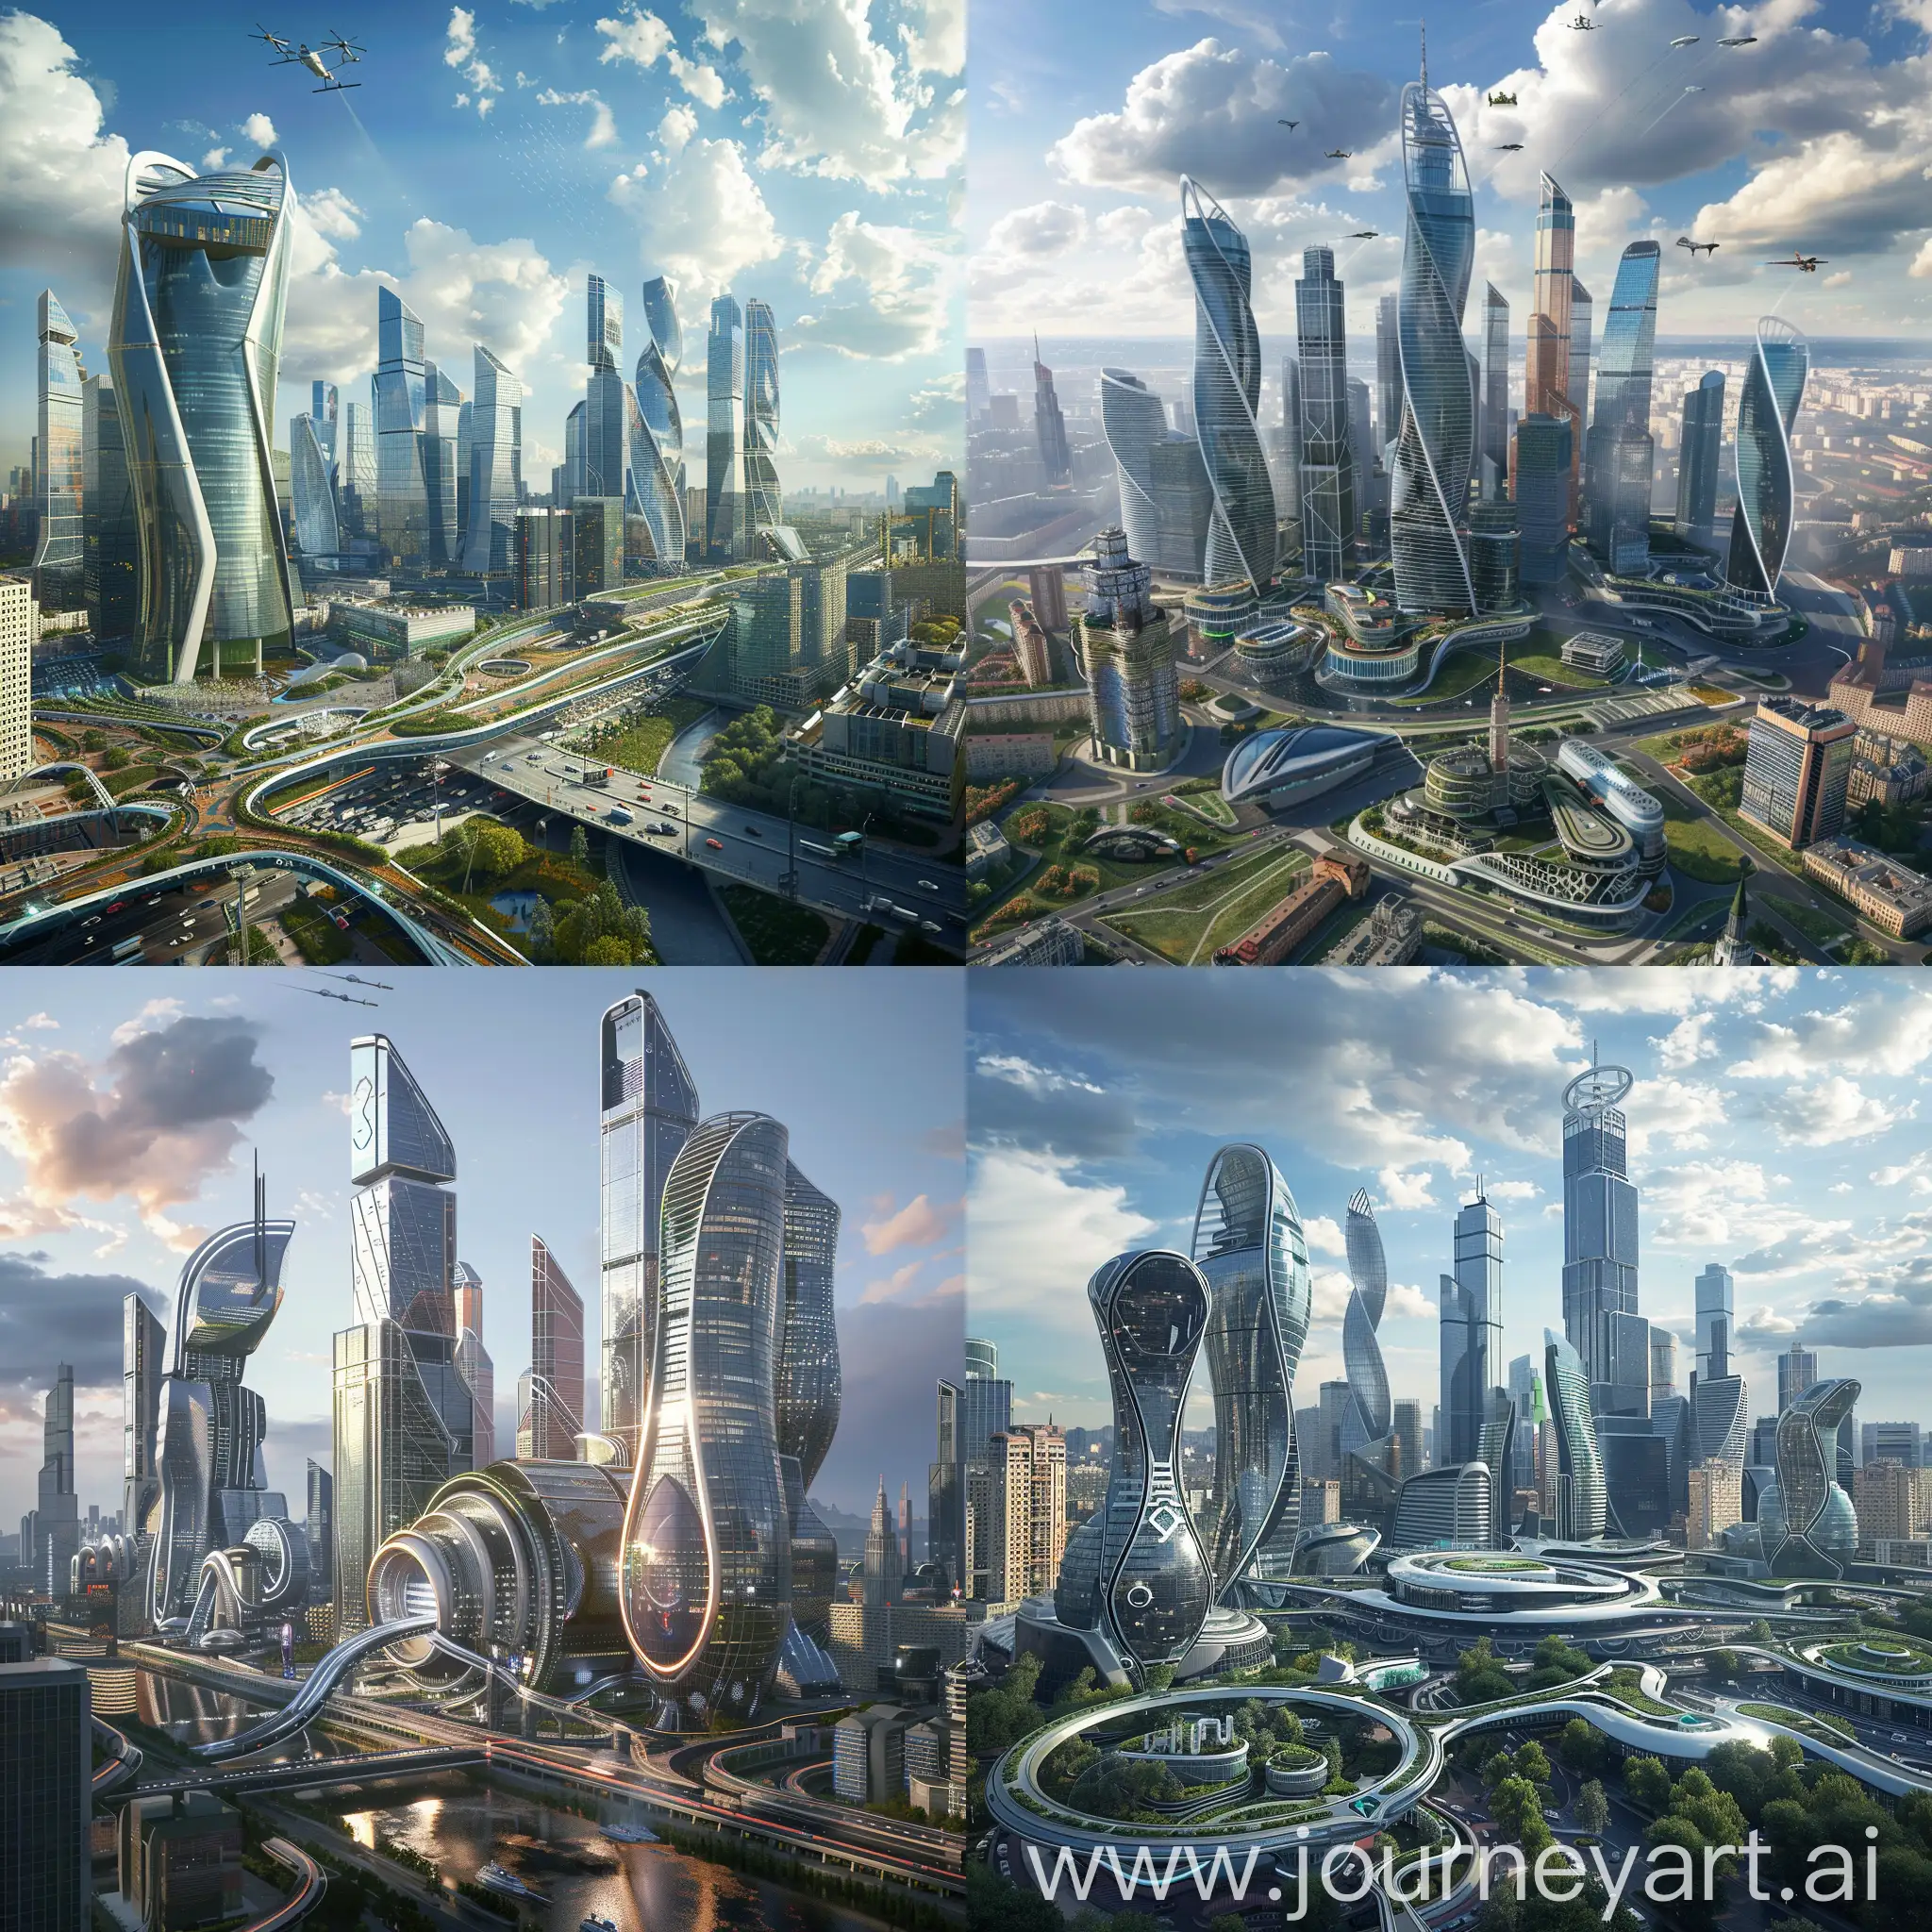 Advanced-SciFi-Moscow-Smart-Urban-Planning-and-Futuristic-Technology